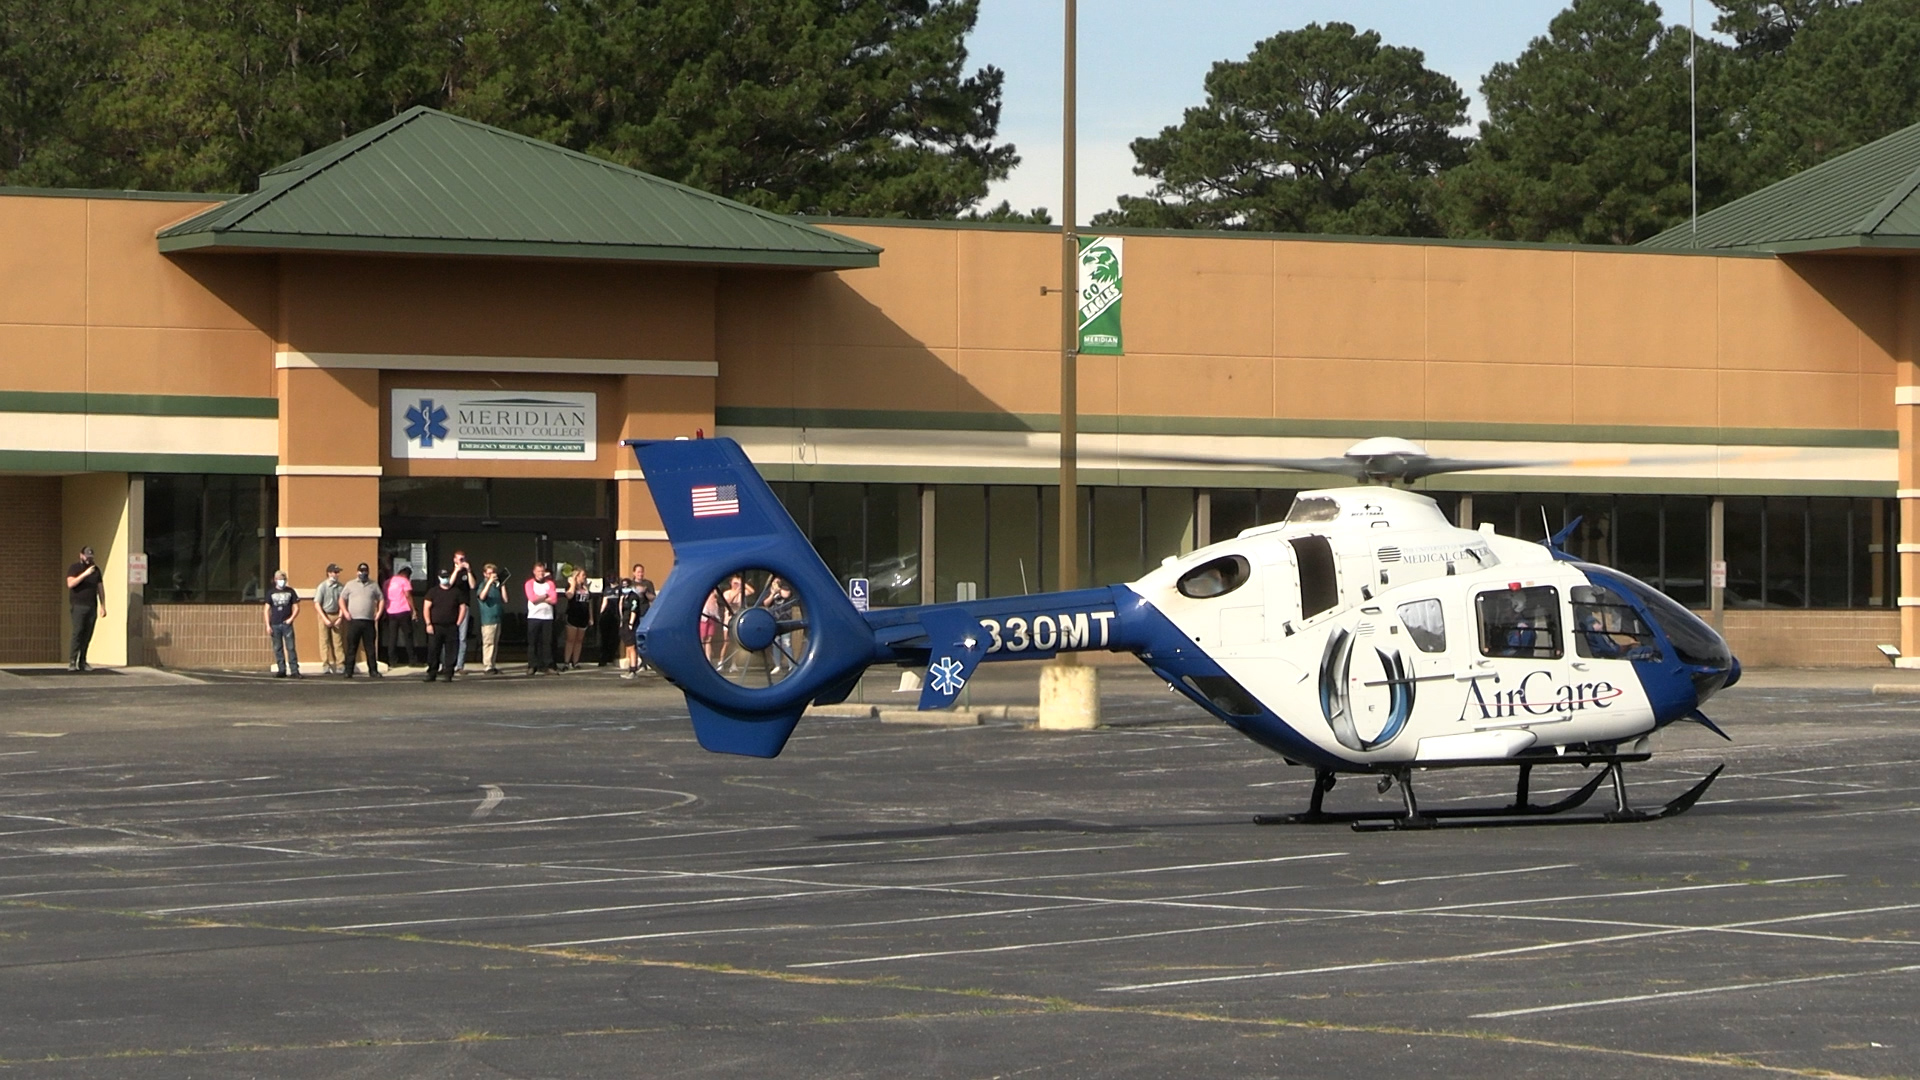 AirCare2 lands on the Tommy E. Dulaney Center parking lot. 